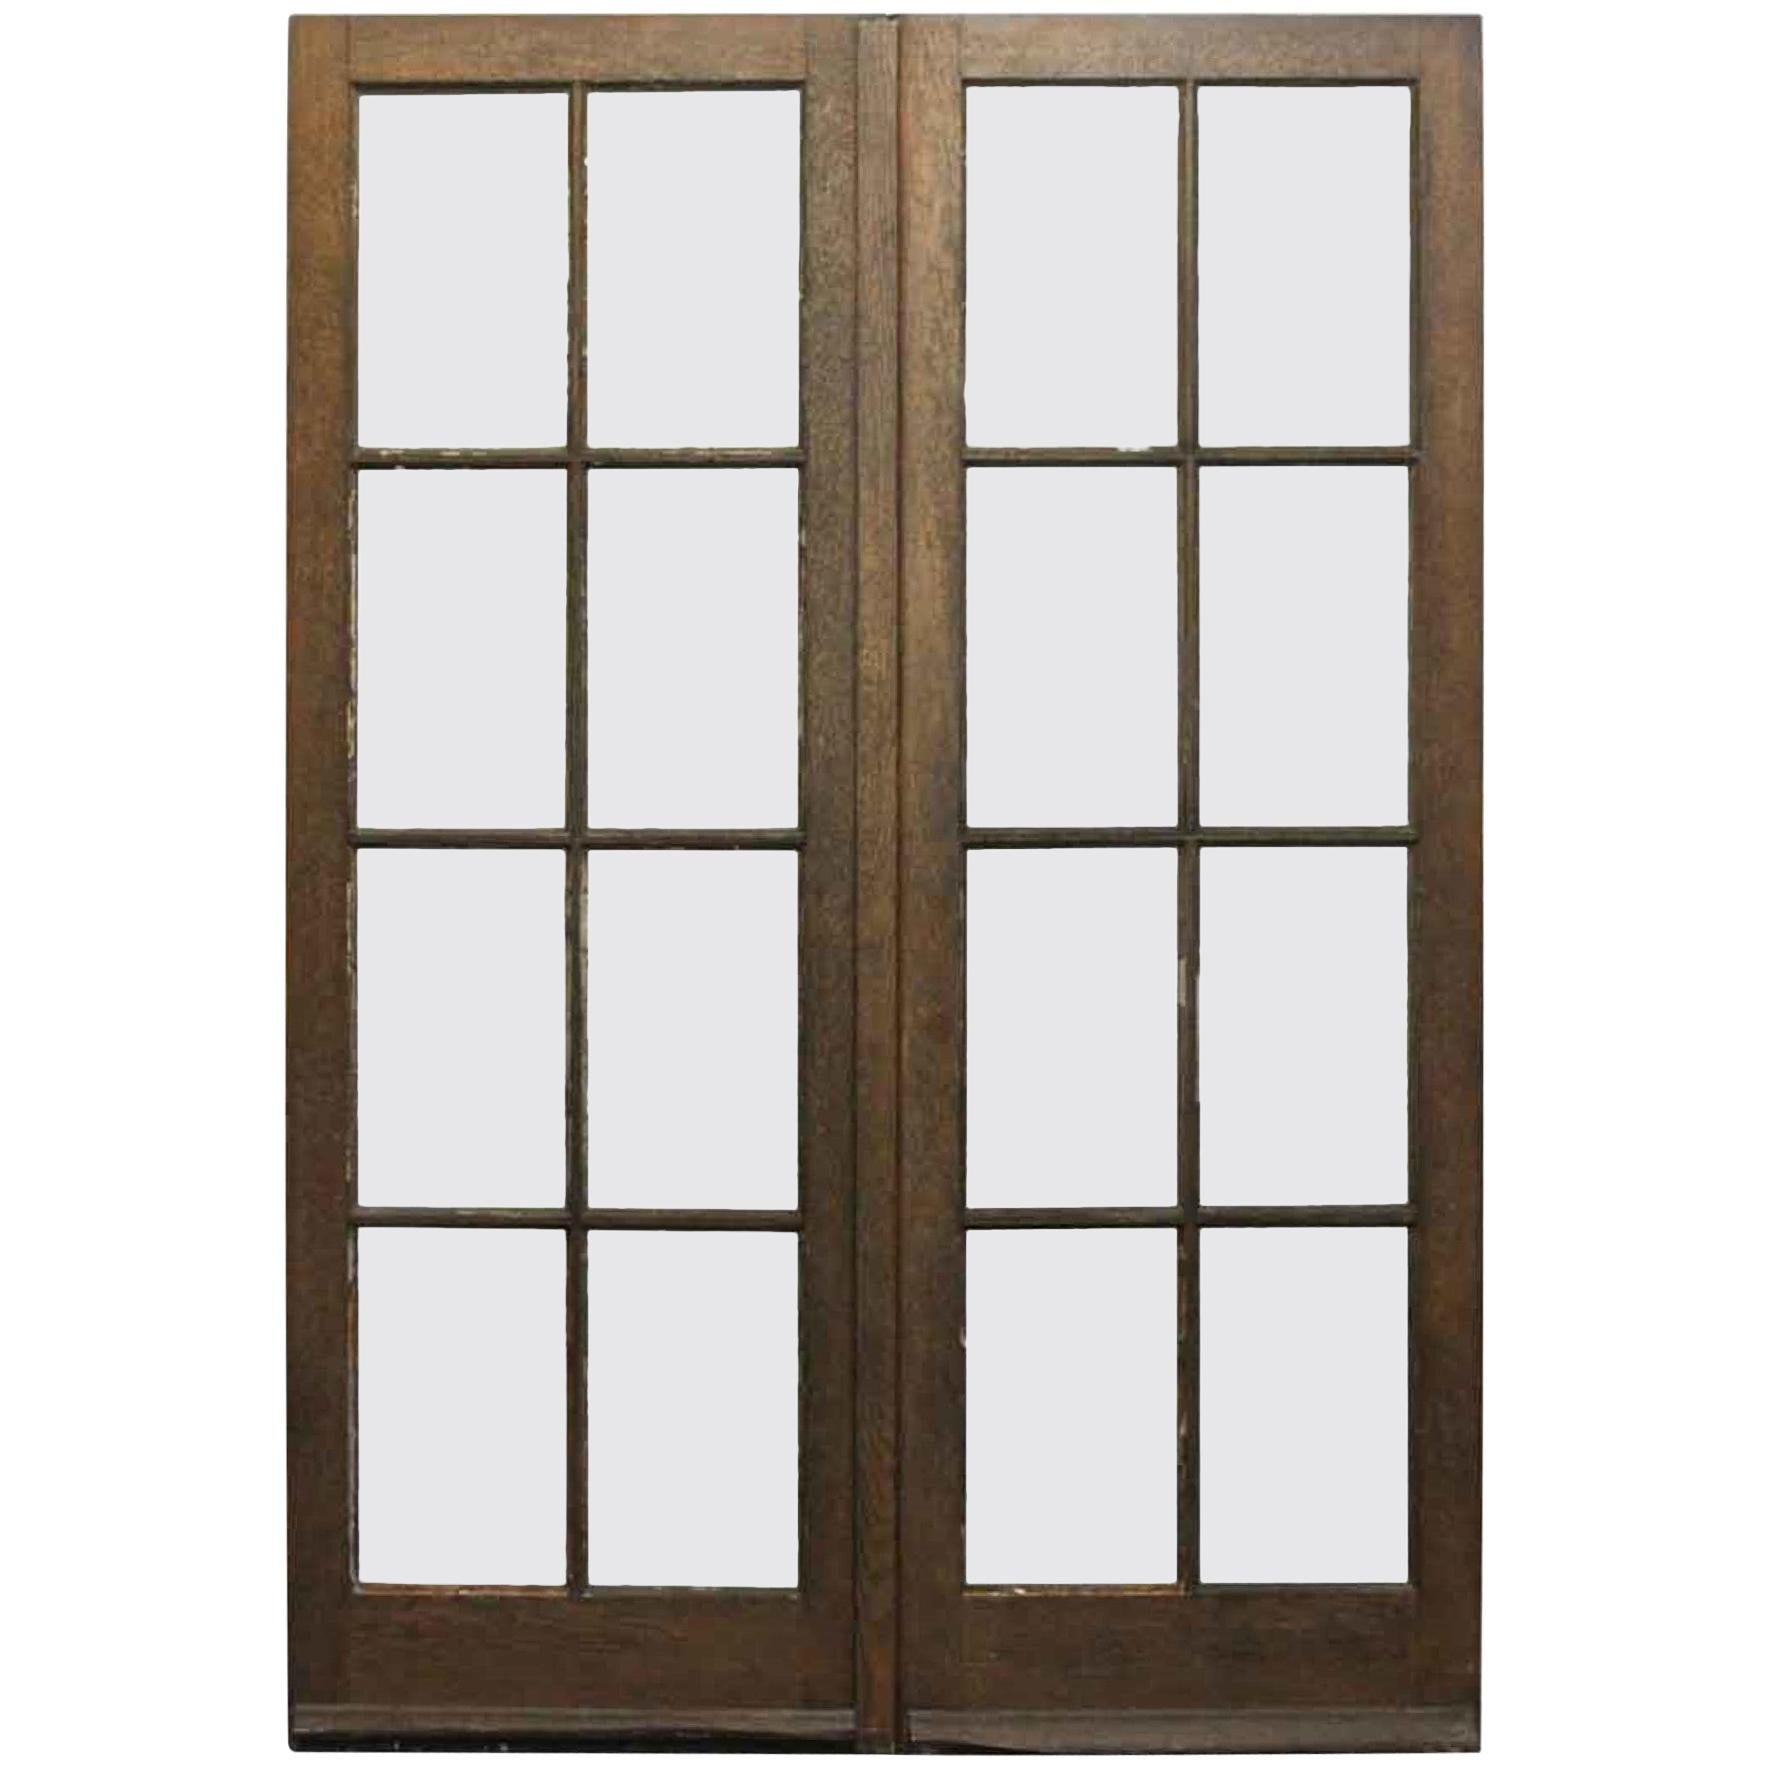 1920s Solid Oak Double French Doors with Eight Panes from the Billy Rose Mansion